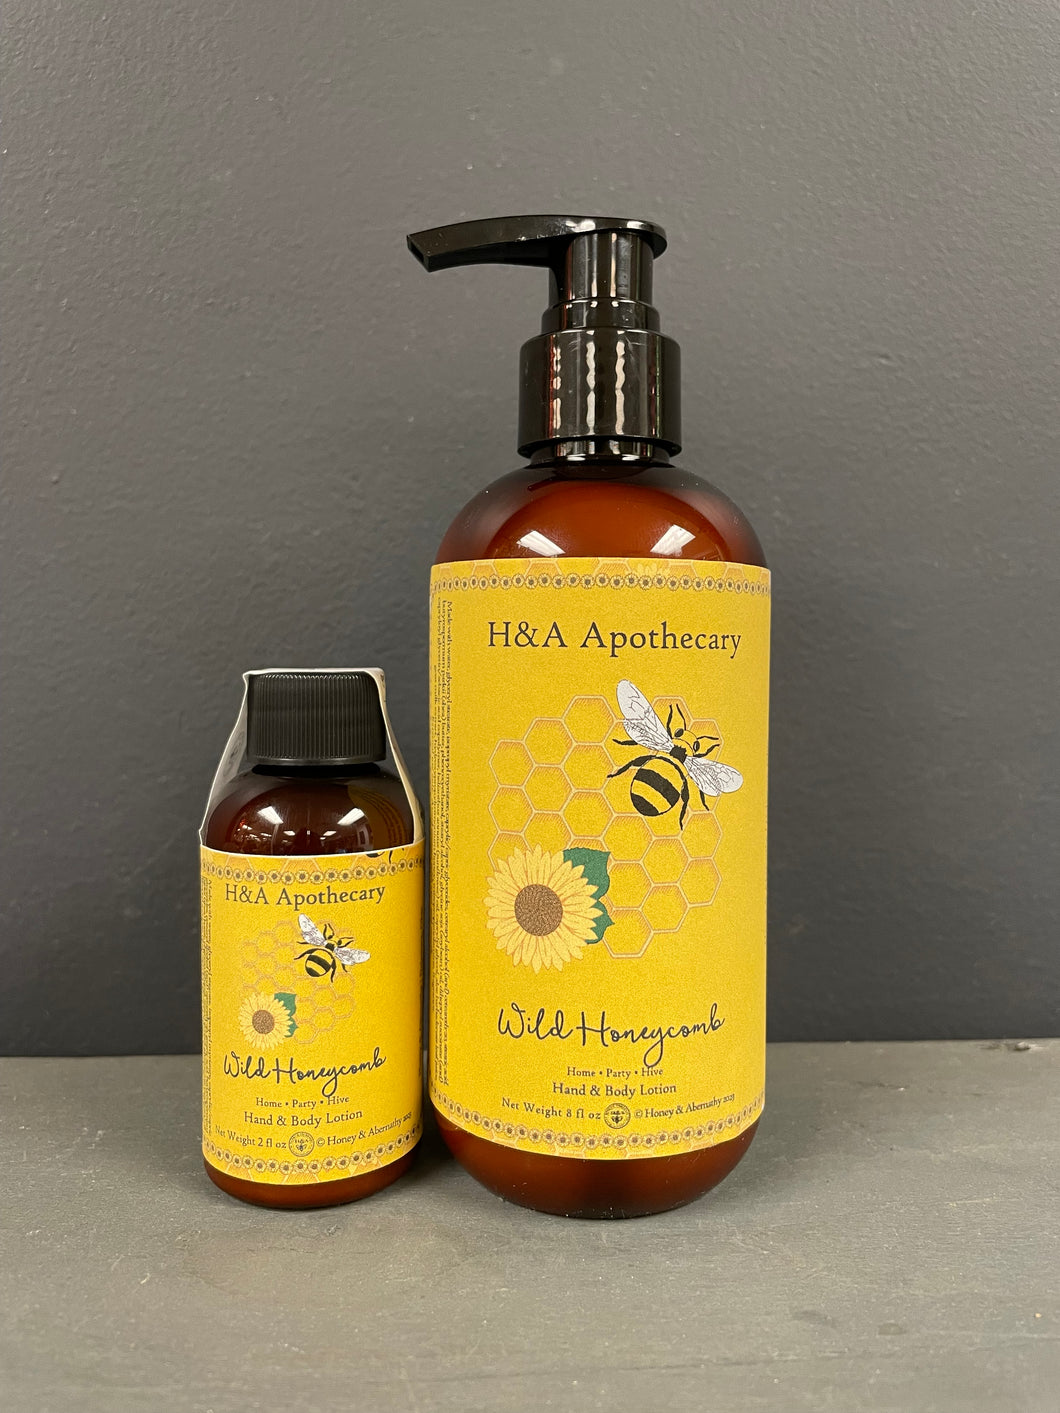 H&A Apothecary Wild Honeycomb Hand & Body Lotion